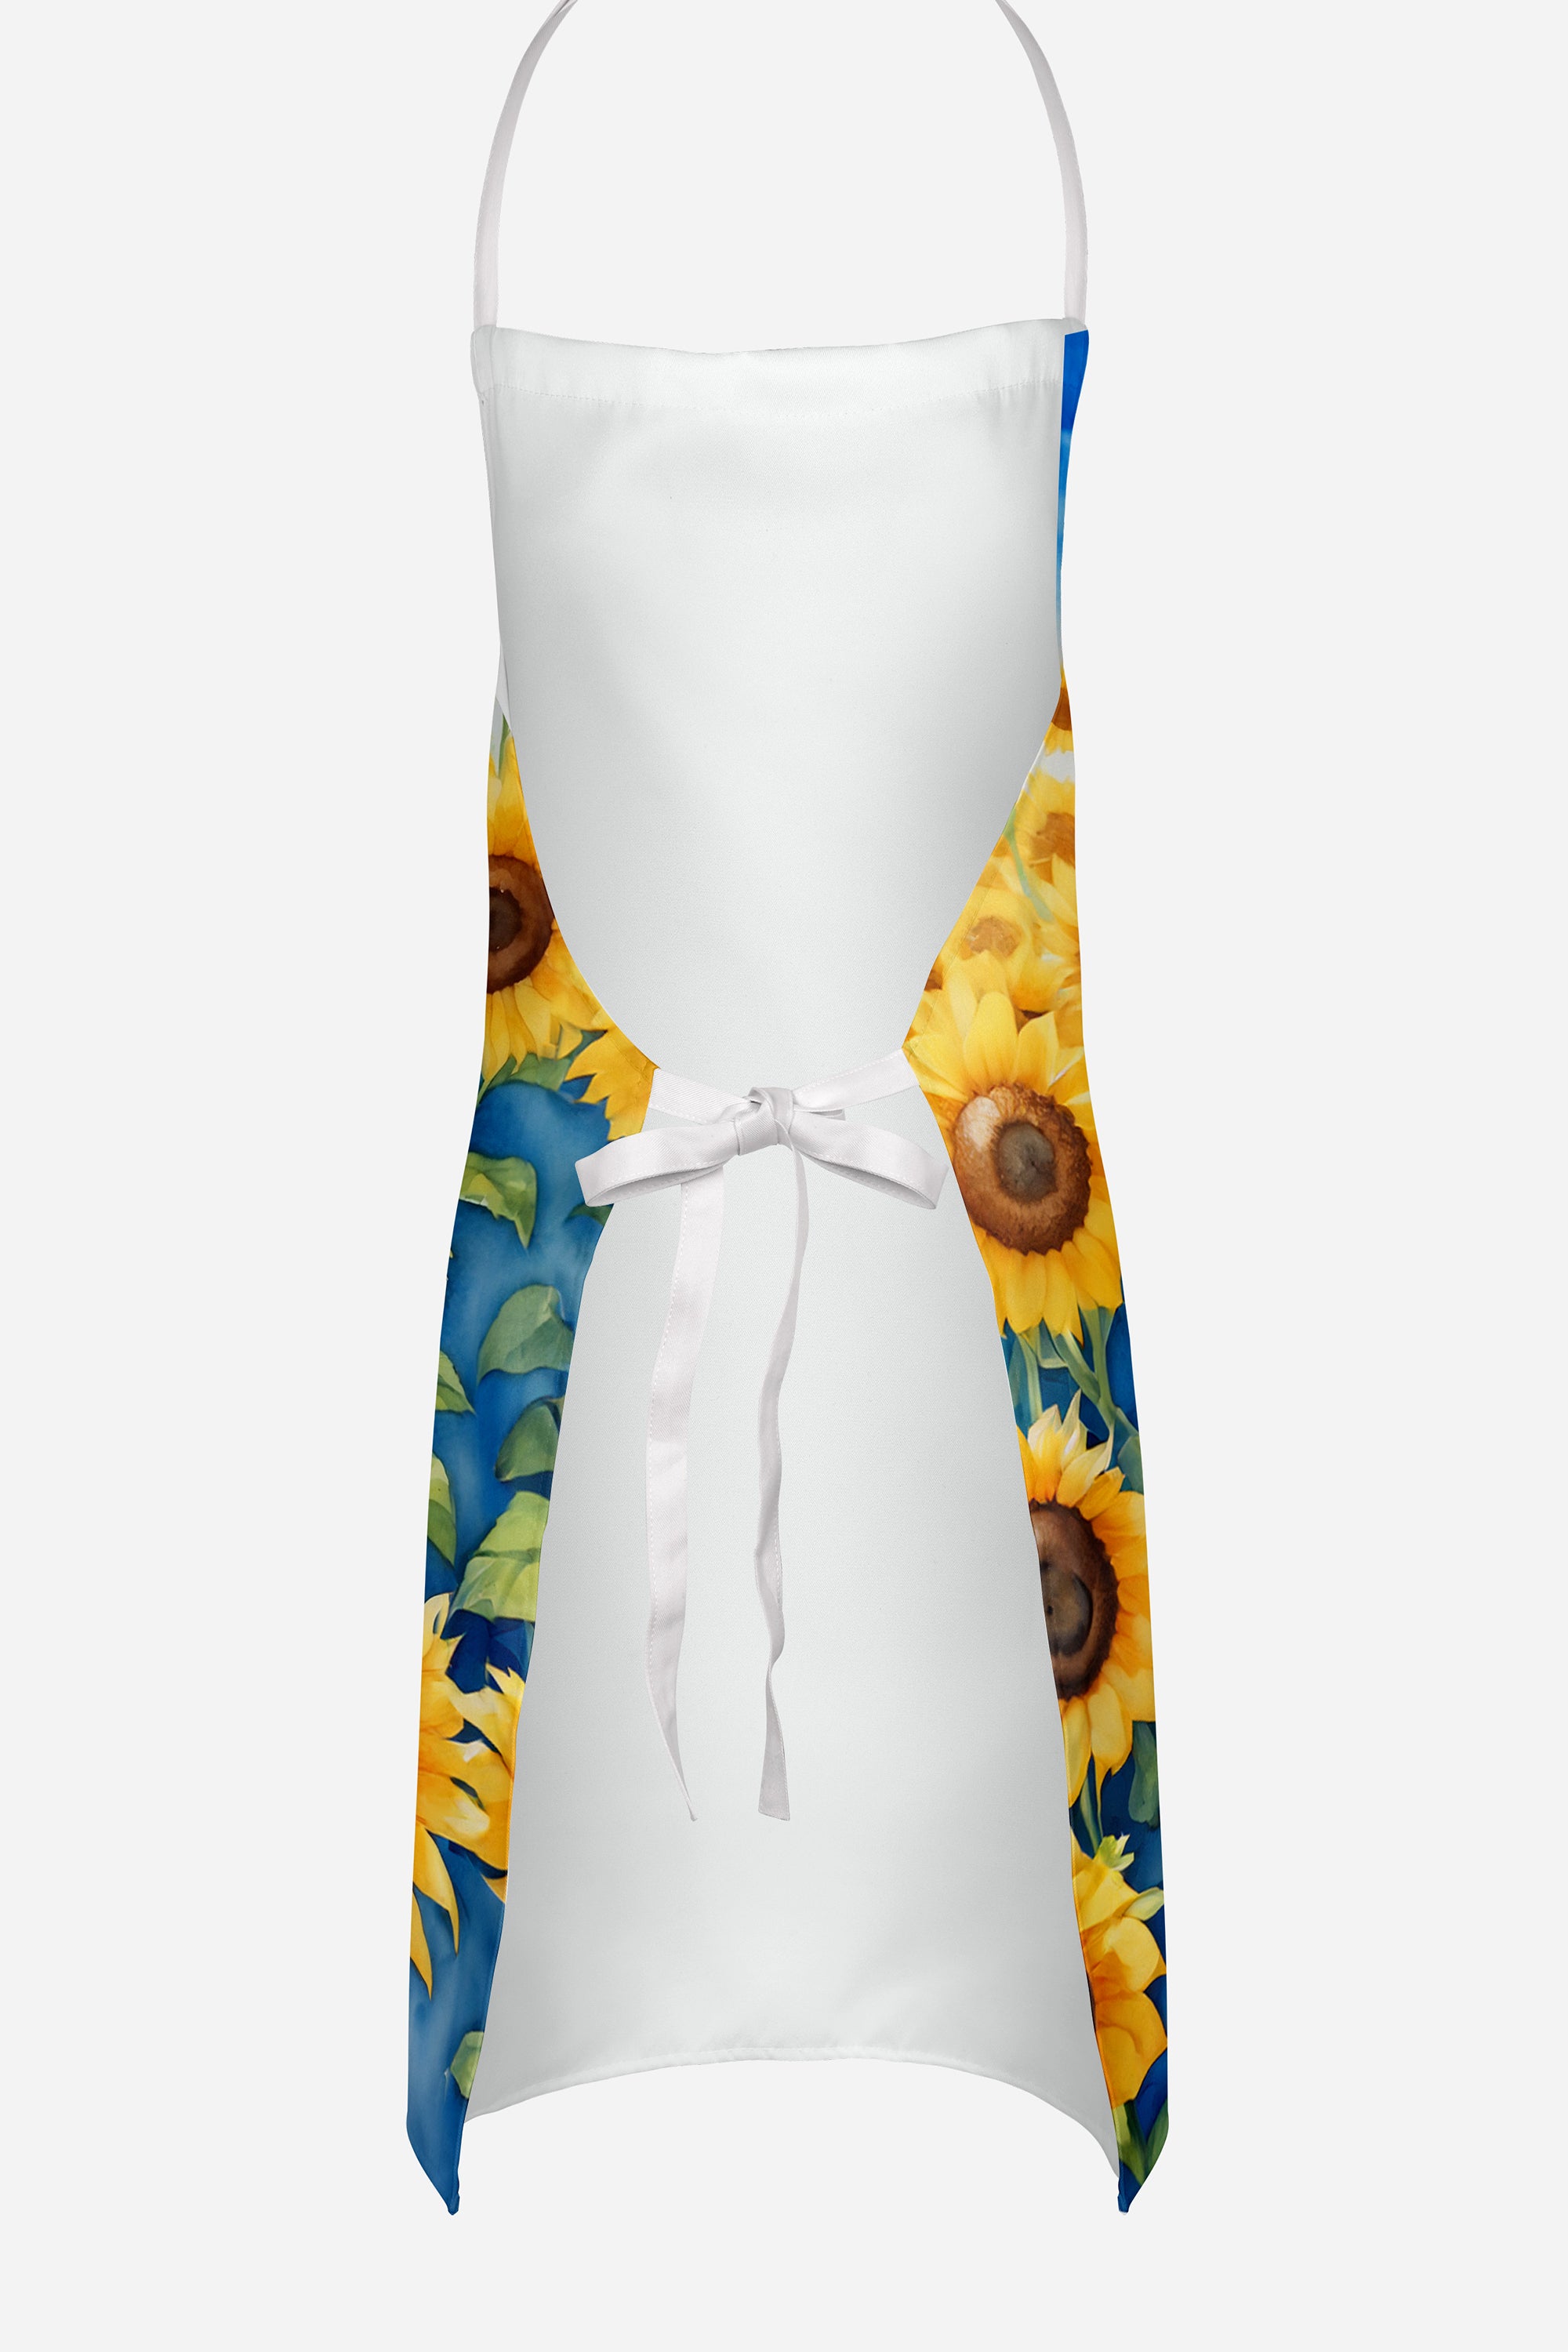 Jack Russell Terrier in Sunflowers Apron